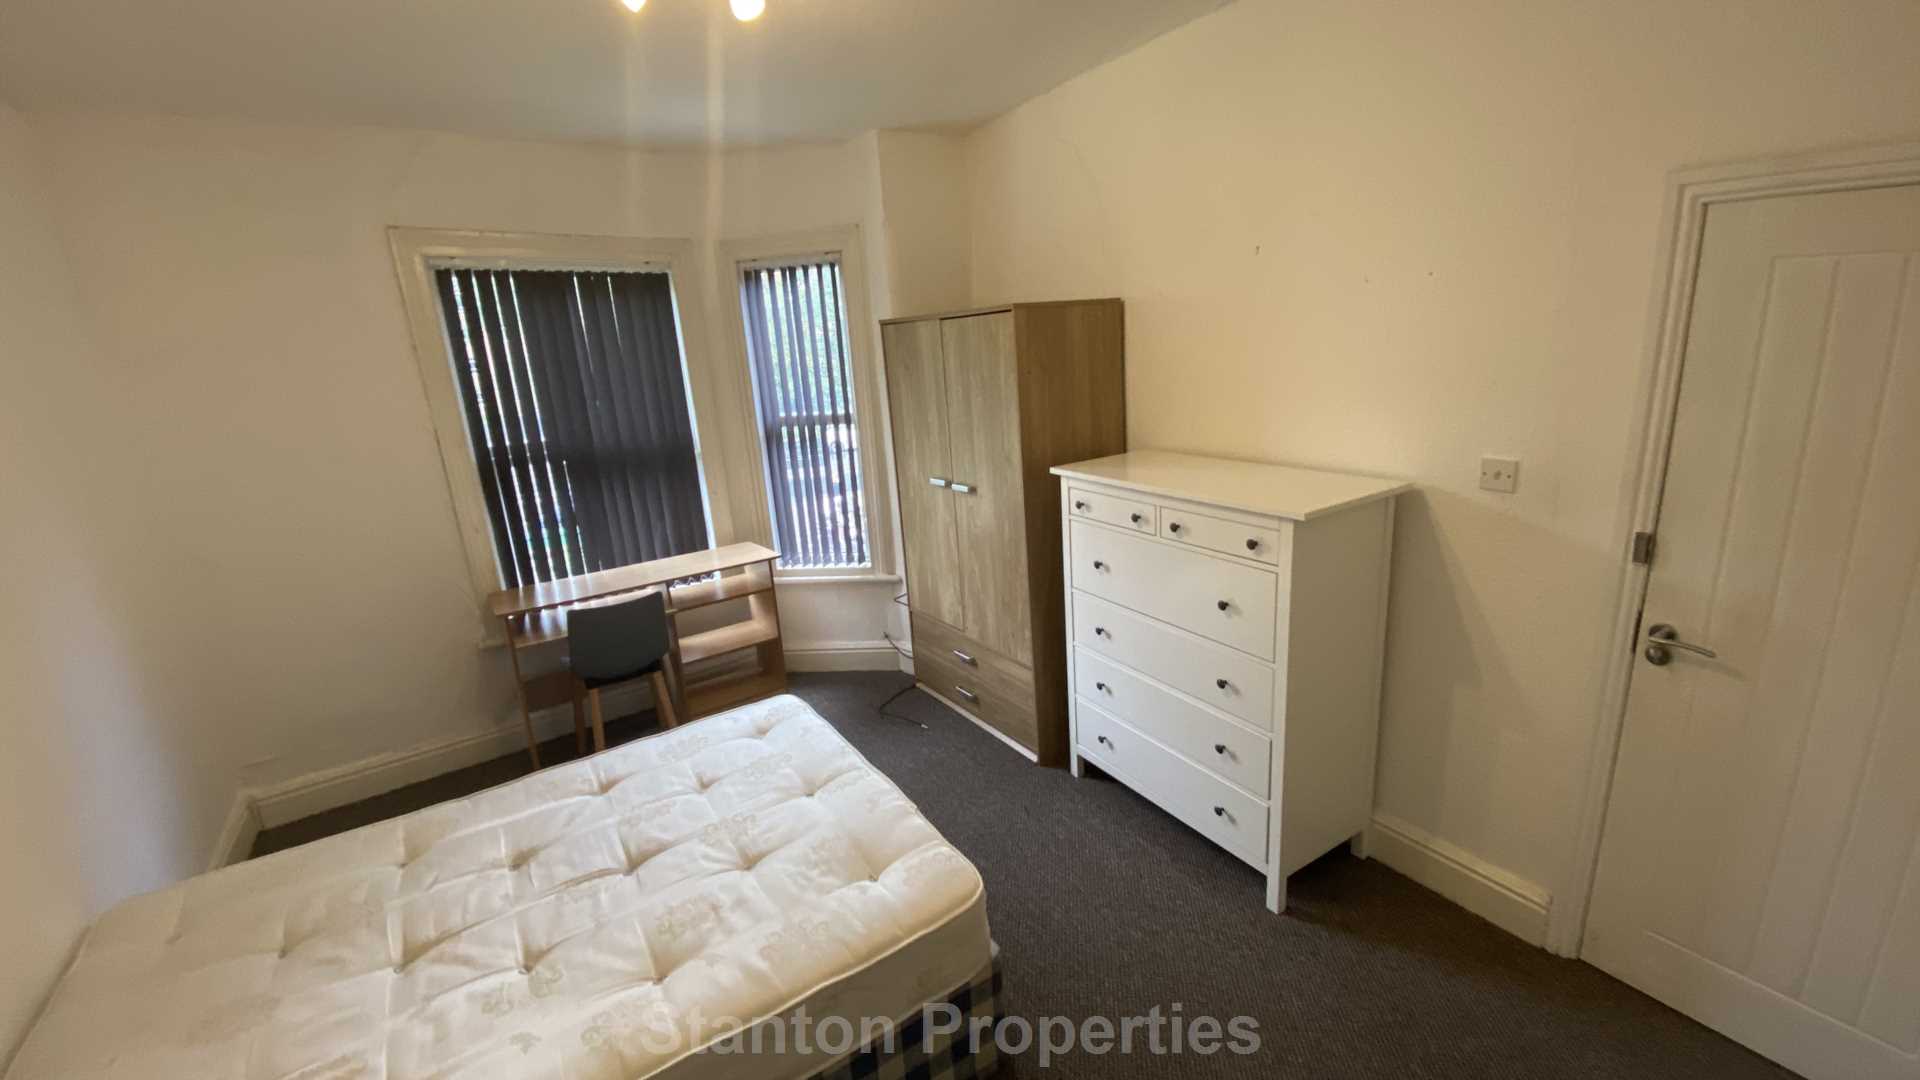 £130 pppw, Moseley Road, Fallowfield, M14 6NR, Image 17